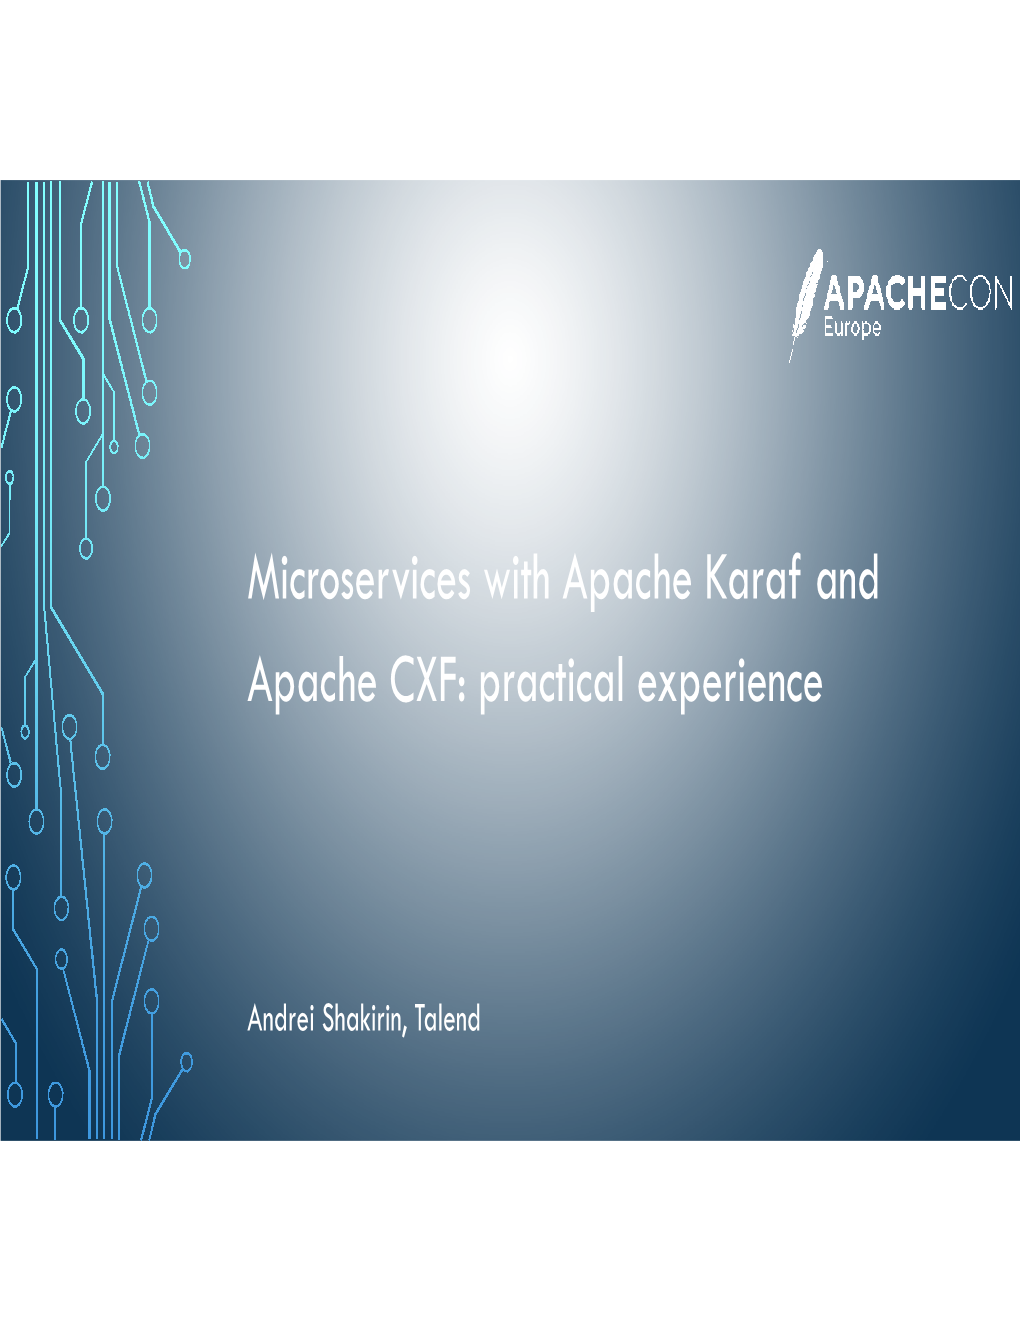 Microservices with Apache Karaf and Apache CXF: Practical Experience